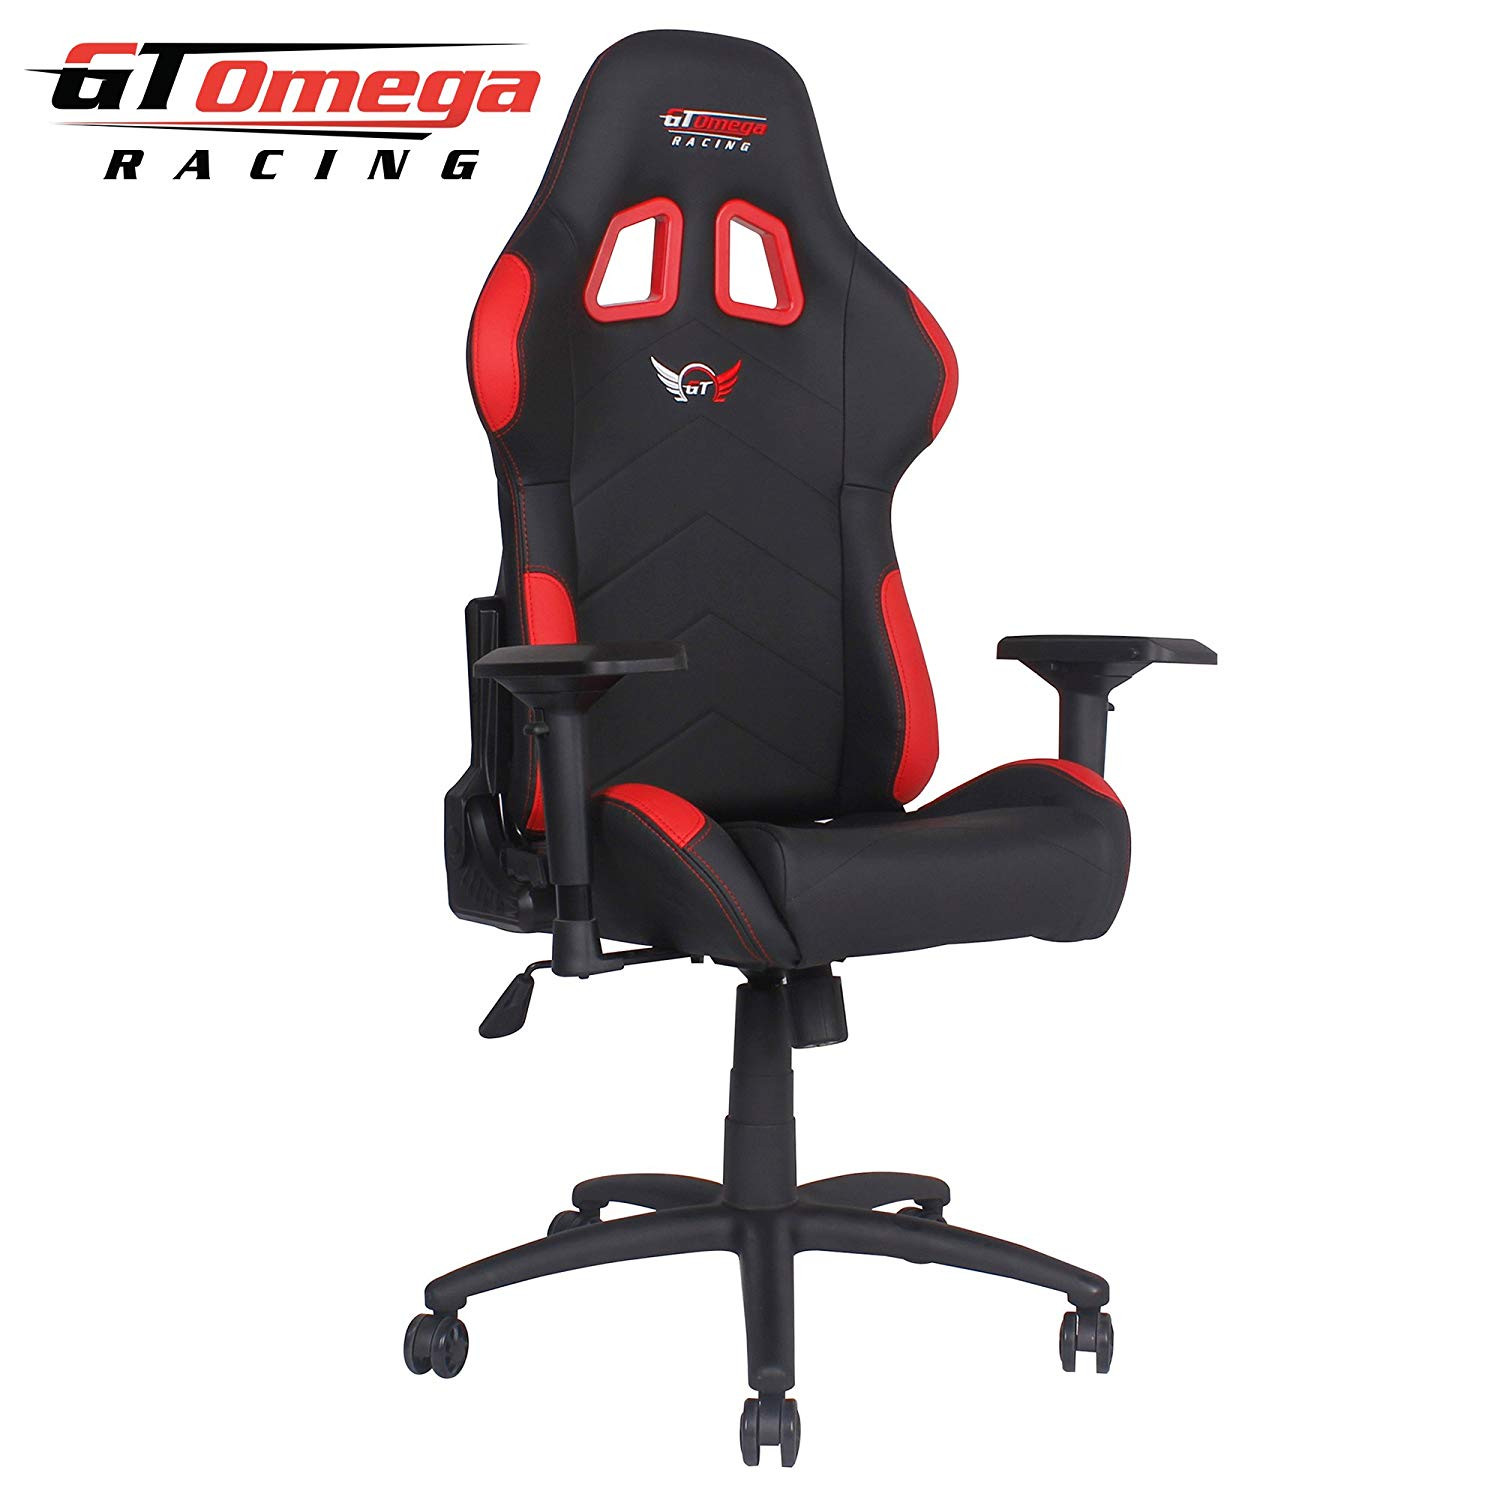 Gt Omega Gt Omega Pro Racing Office Chair Black Next Red Leather 120kg  1889 Stone Maximum Weight  